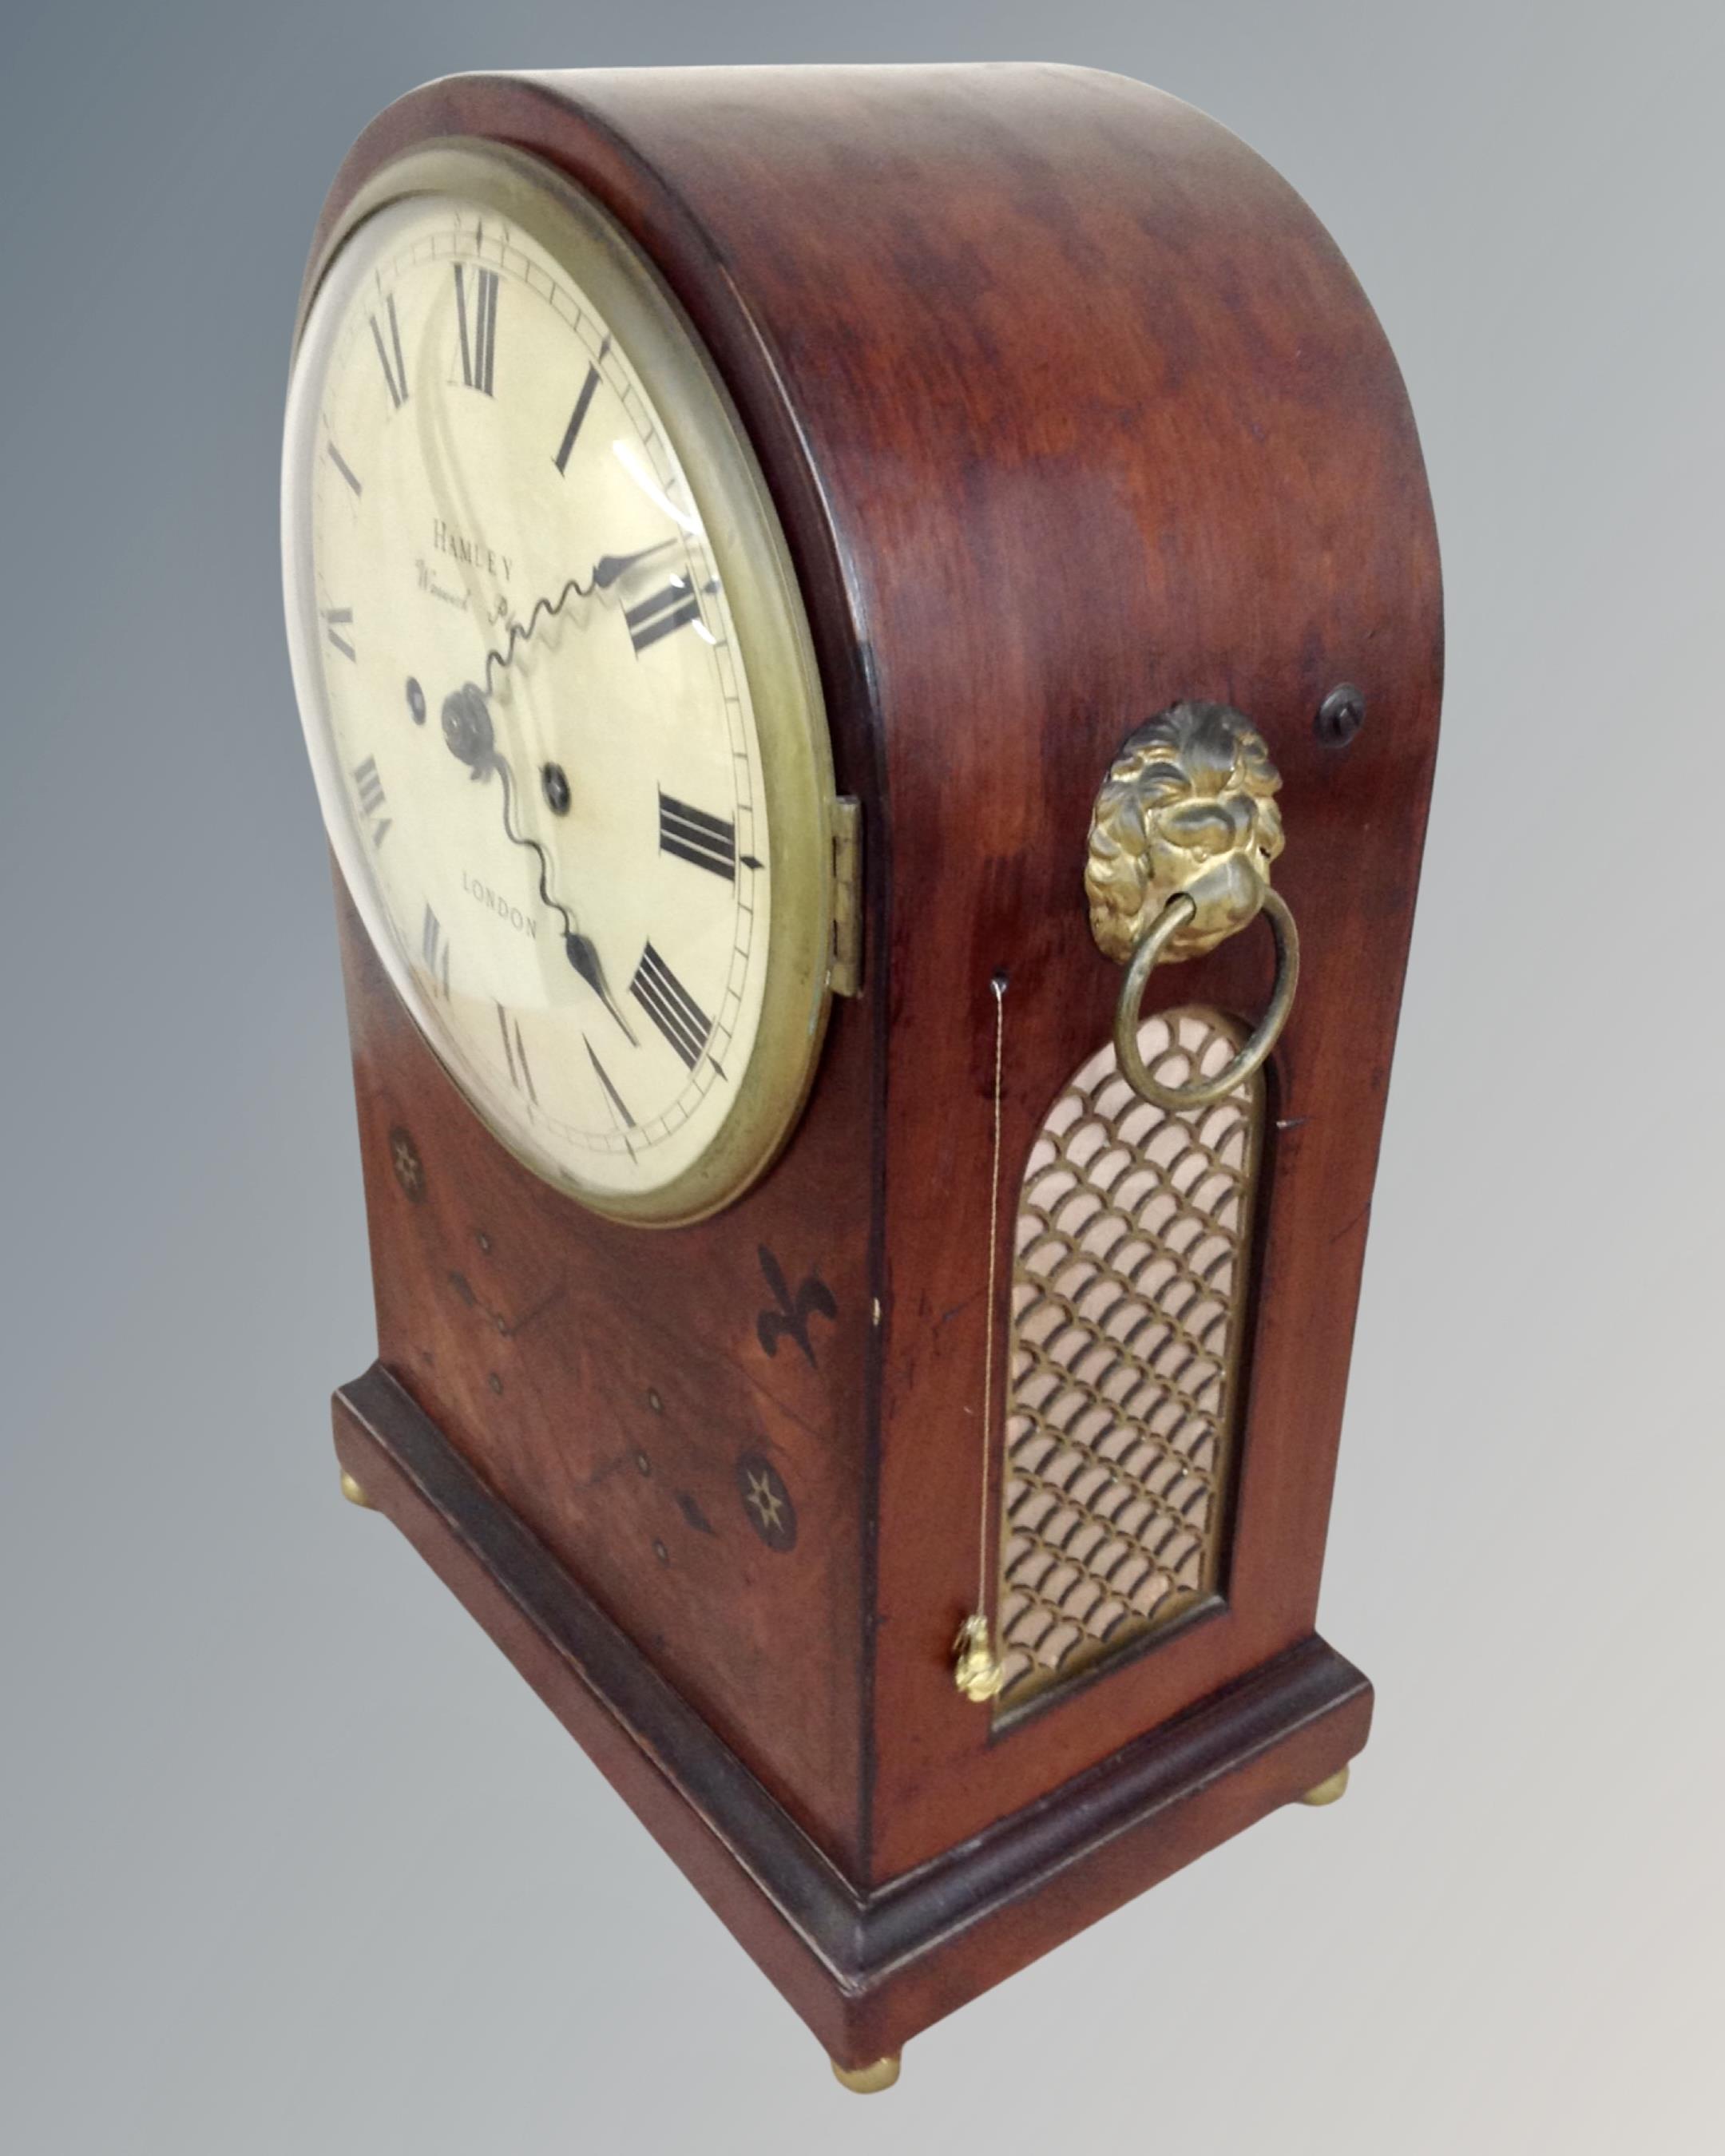 A George III mahogany domed-top repeating eight day bracket clock with chain-driven twin fusée - Image 2 of 2